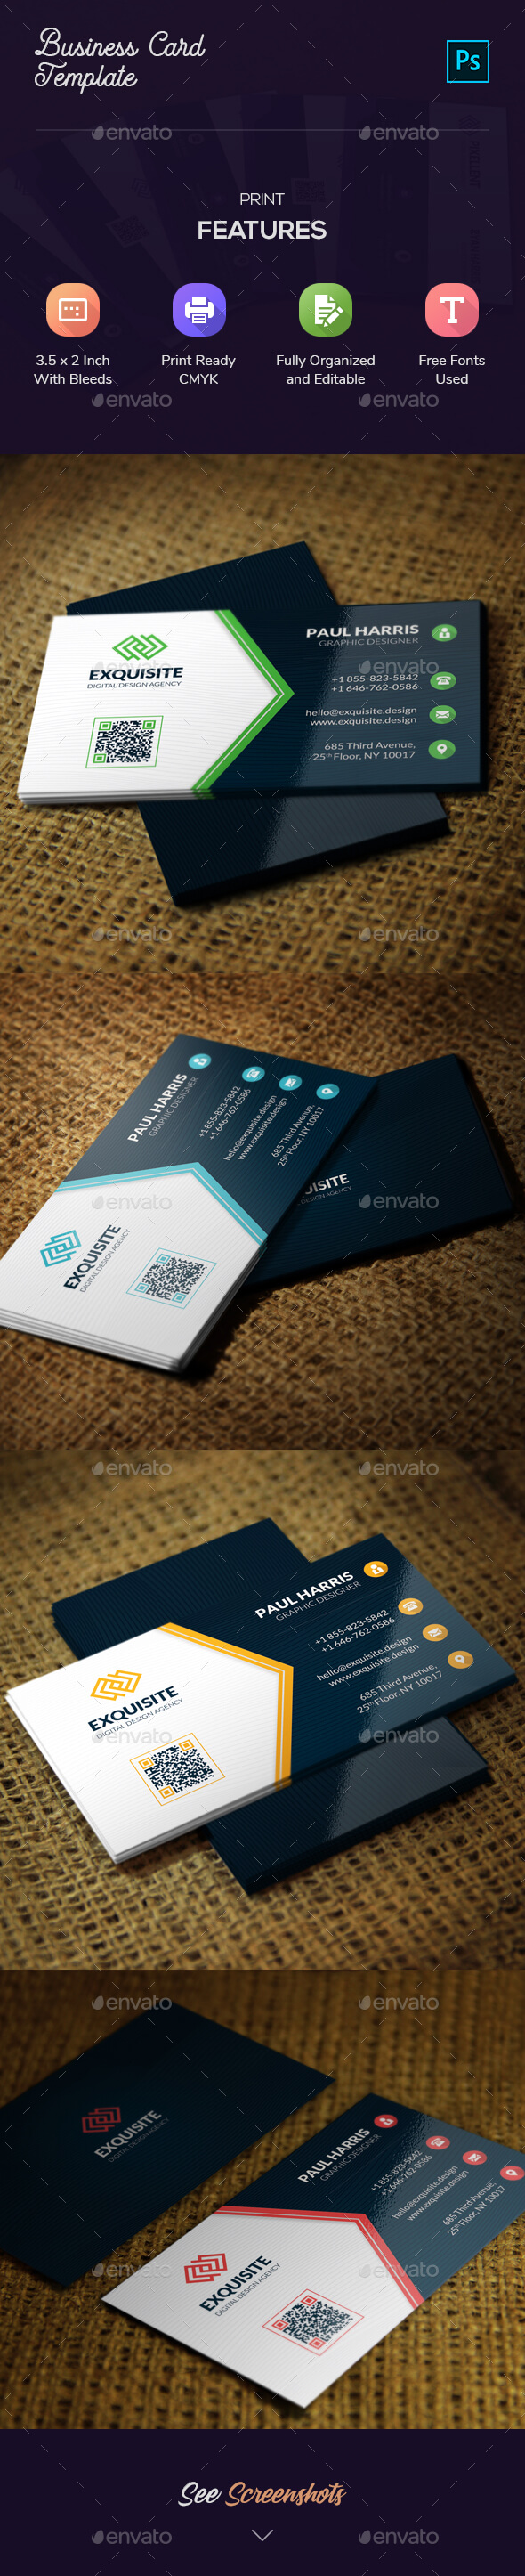 Business Card Templates & Designs From Graphicriver Within Google Search Business Card Template